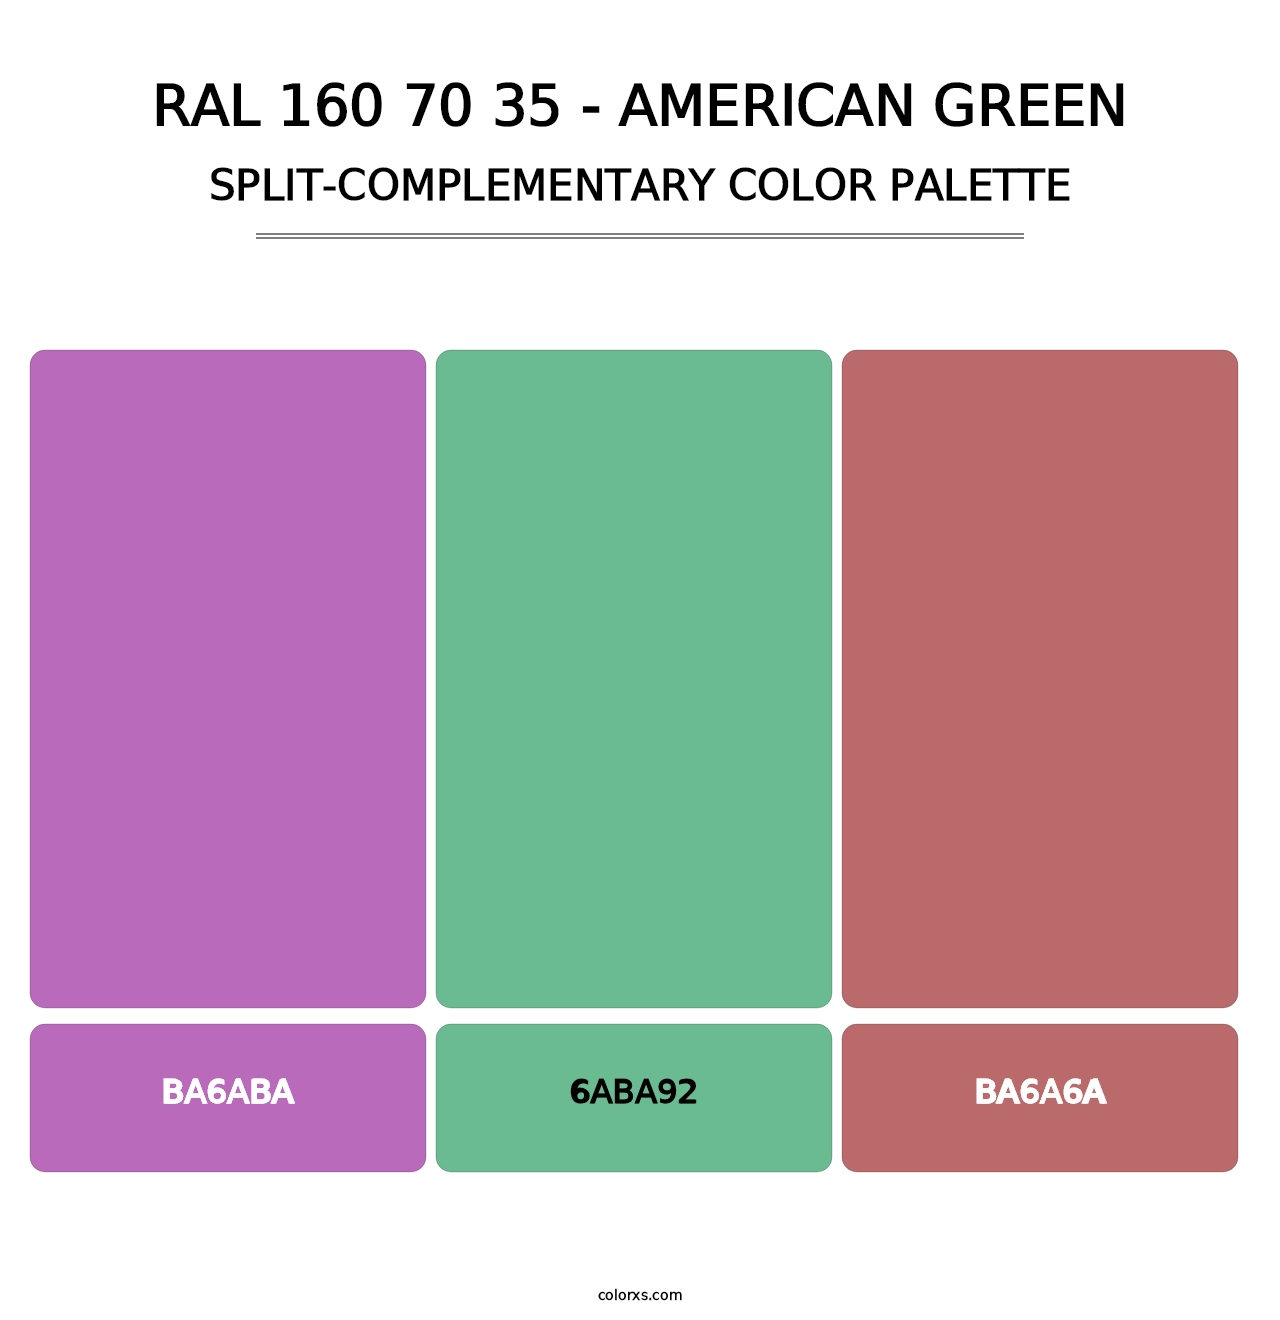 RAL 160 70 35 - American Green - Split-Complementary Color Palette